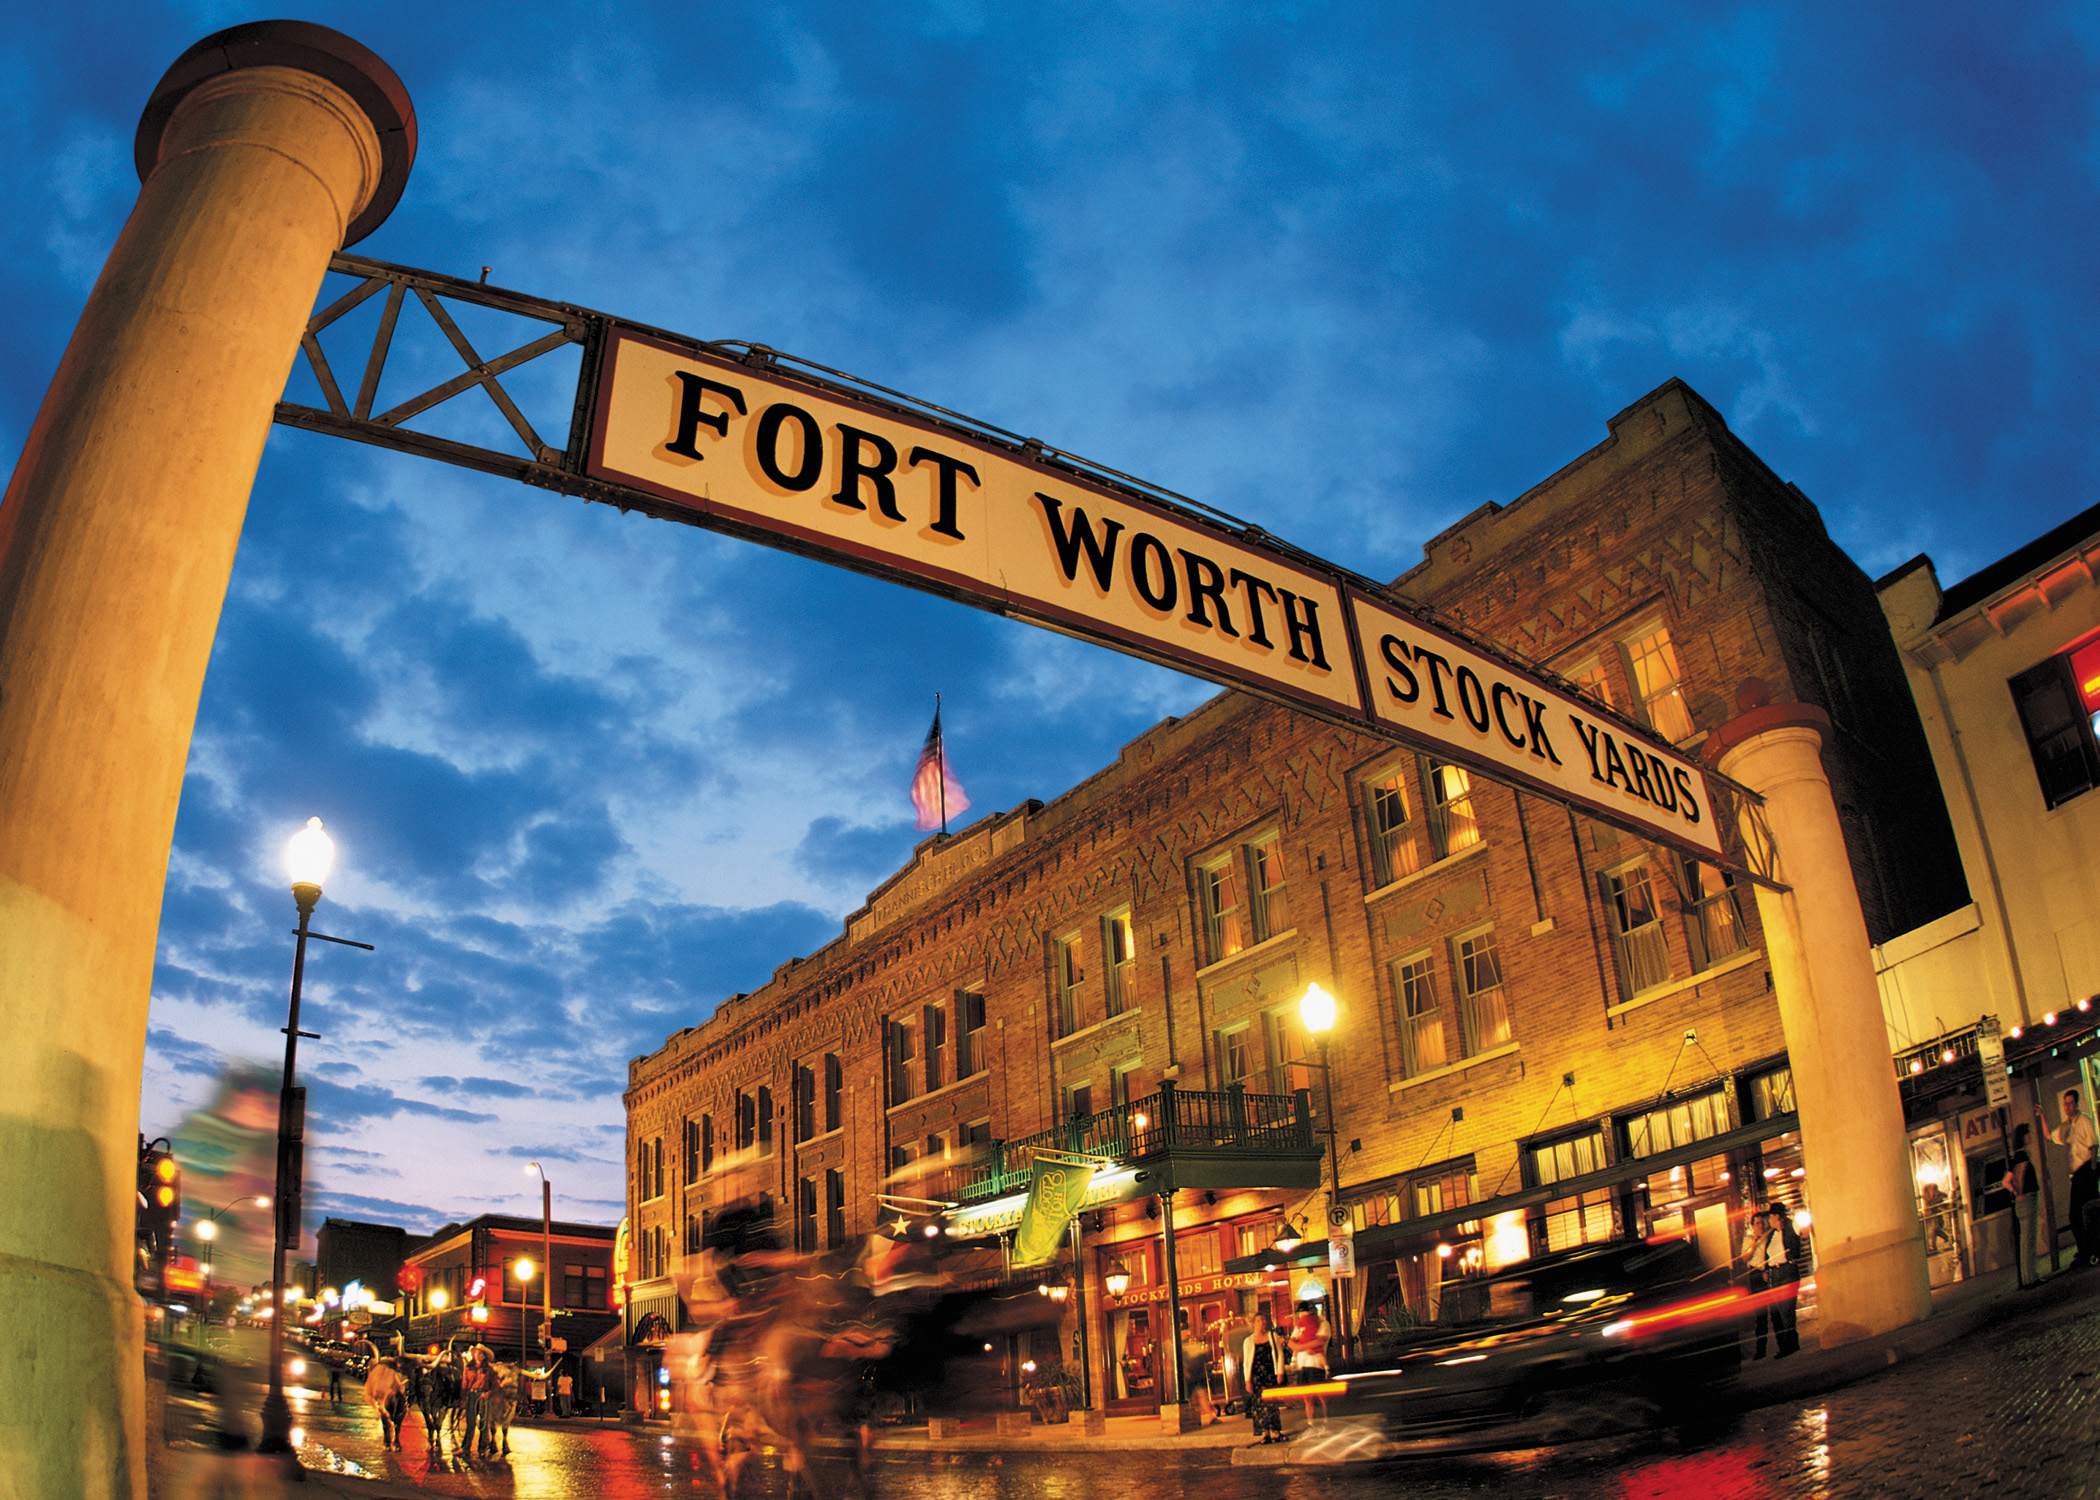 Fort Worth is the new Austin